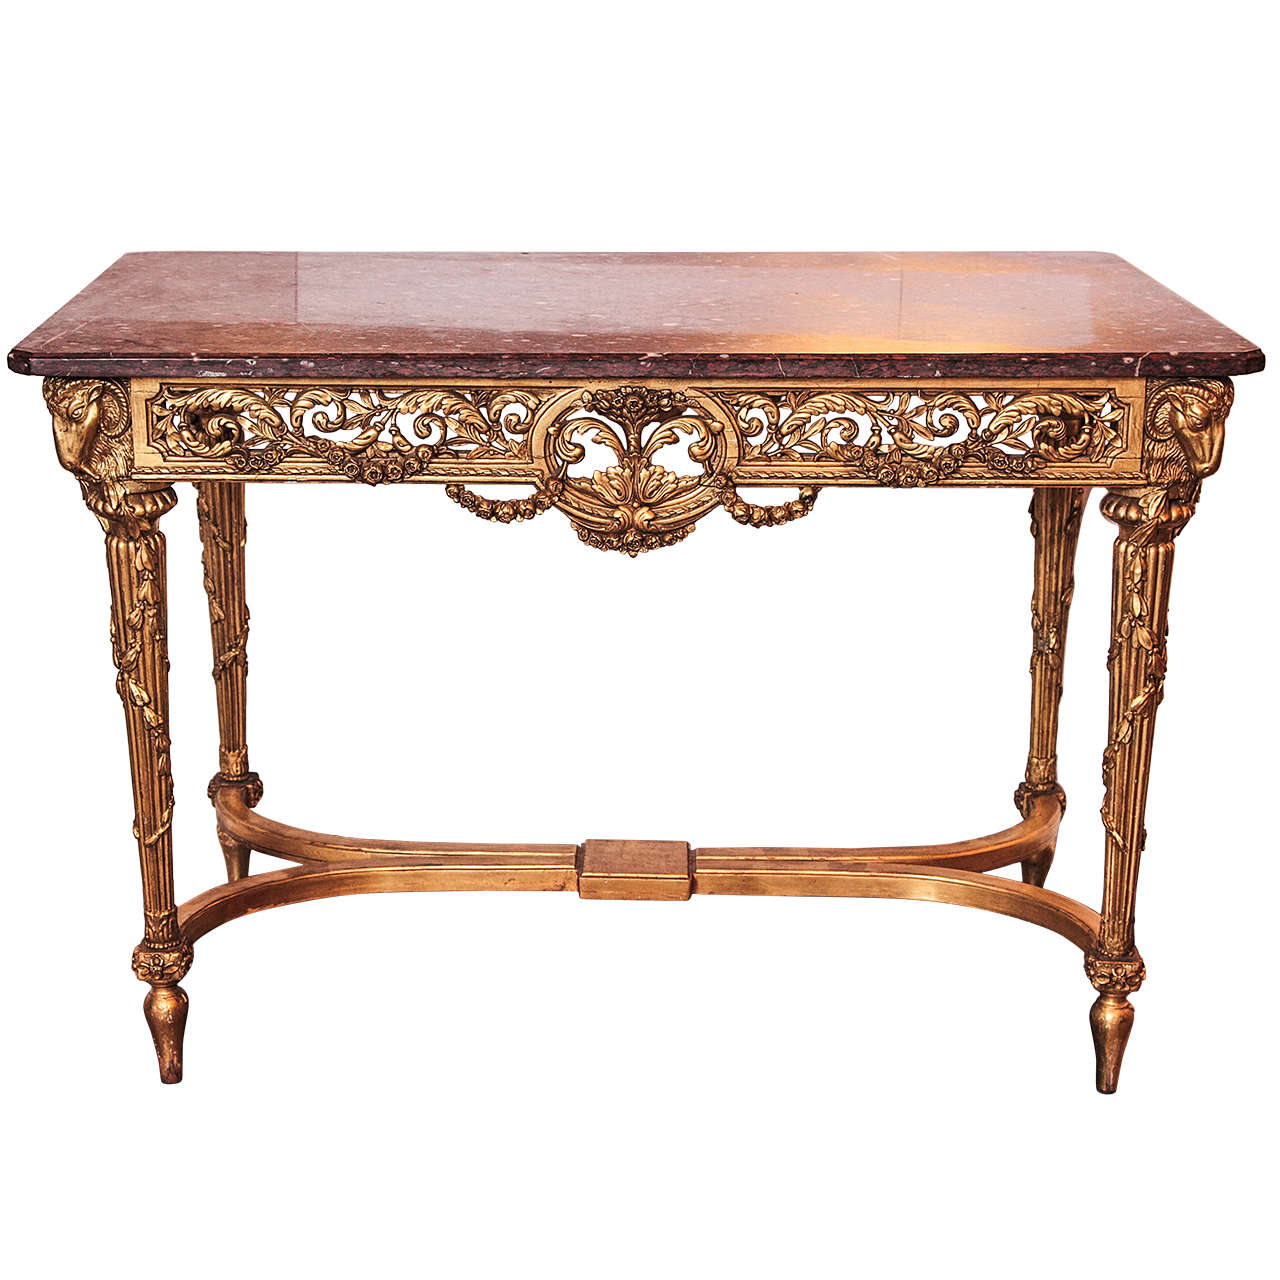 19th century French Louis XVI gilded marble top center table/console